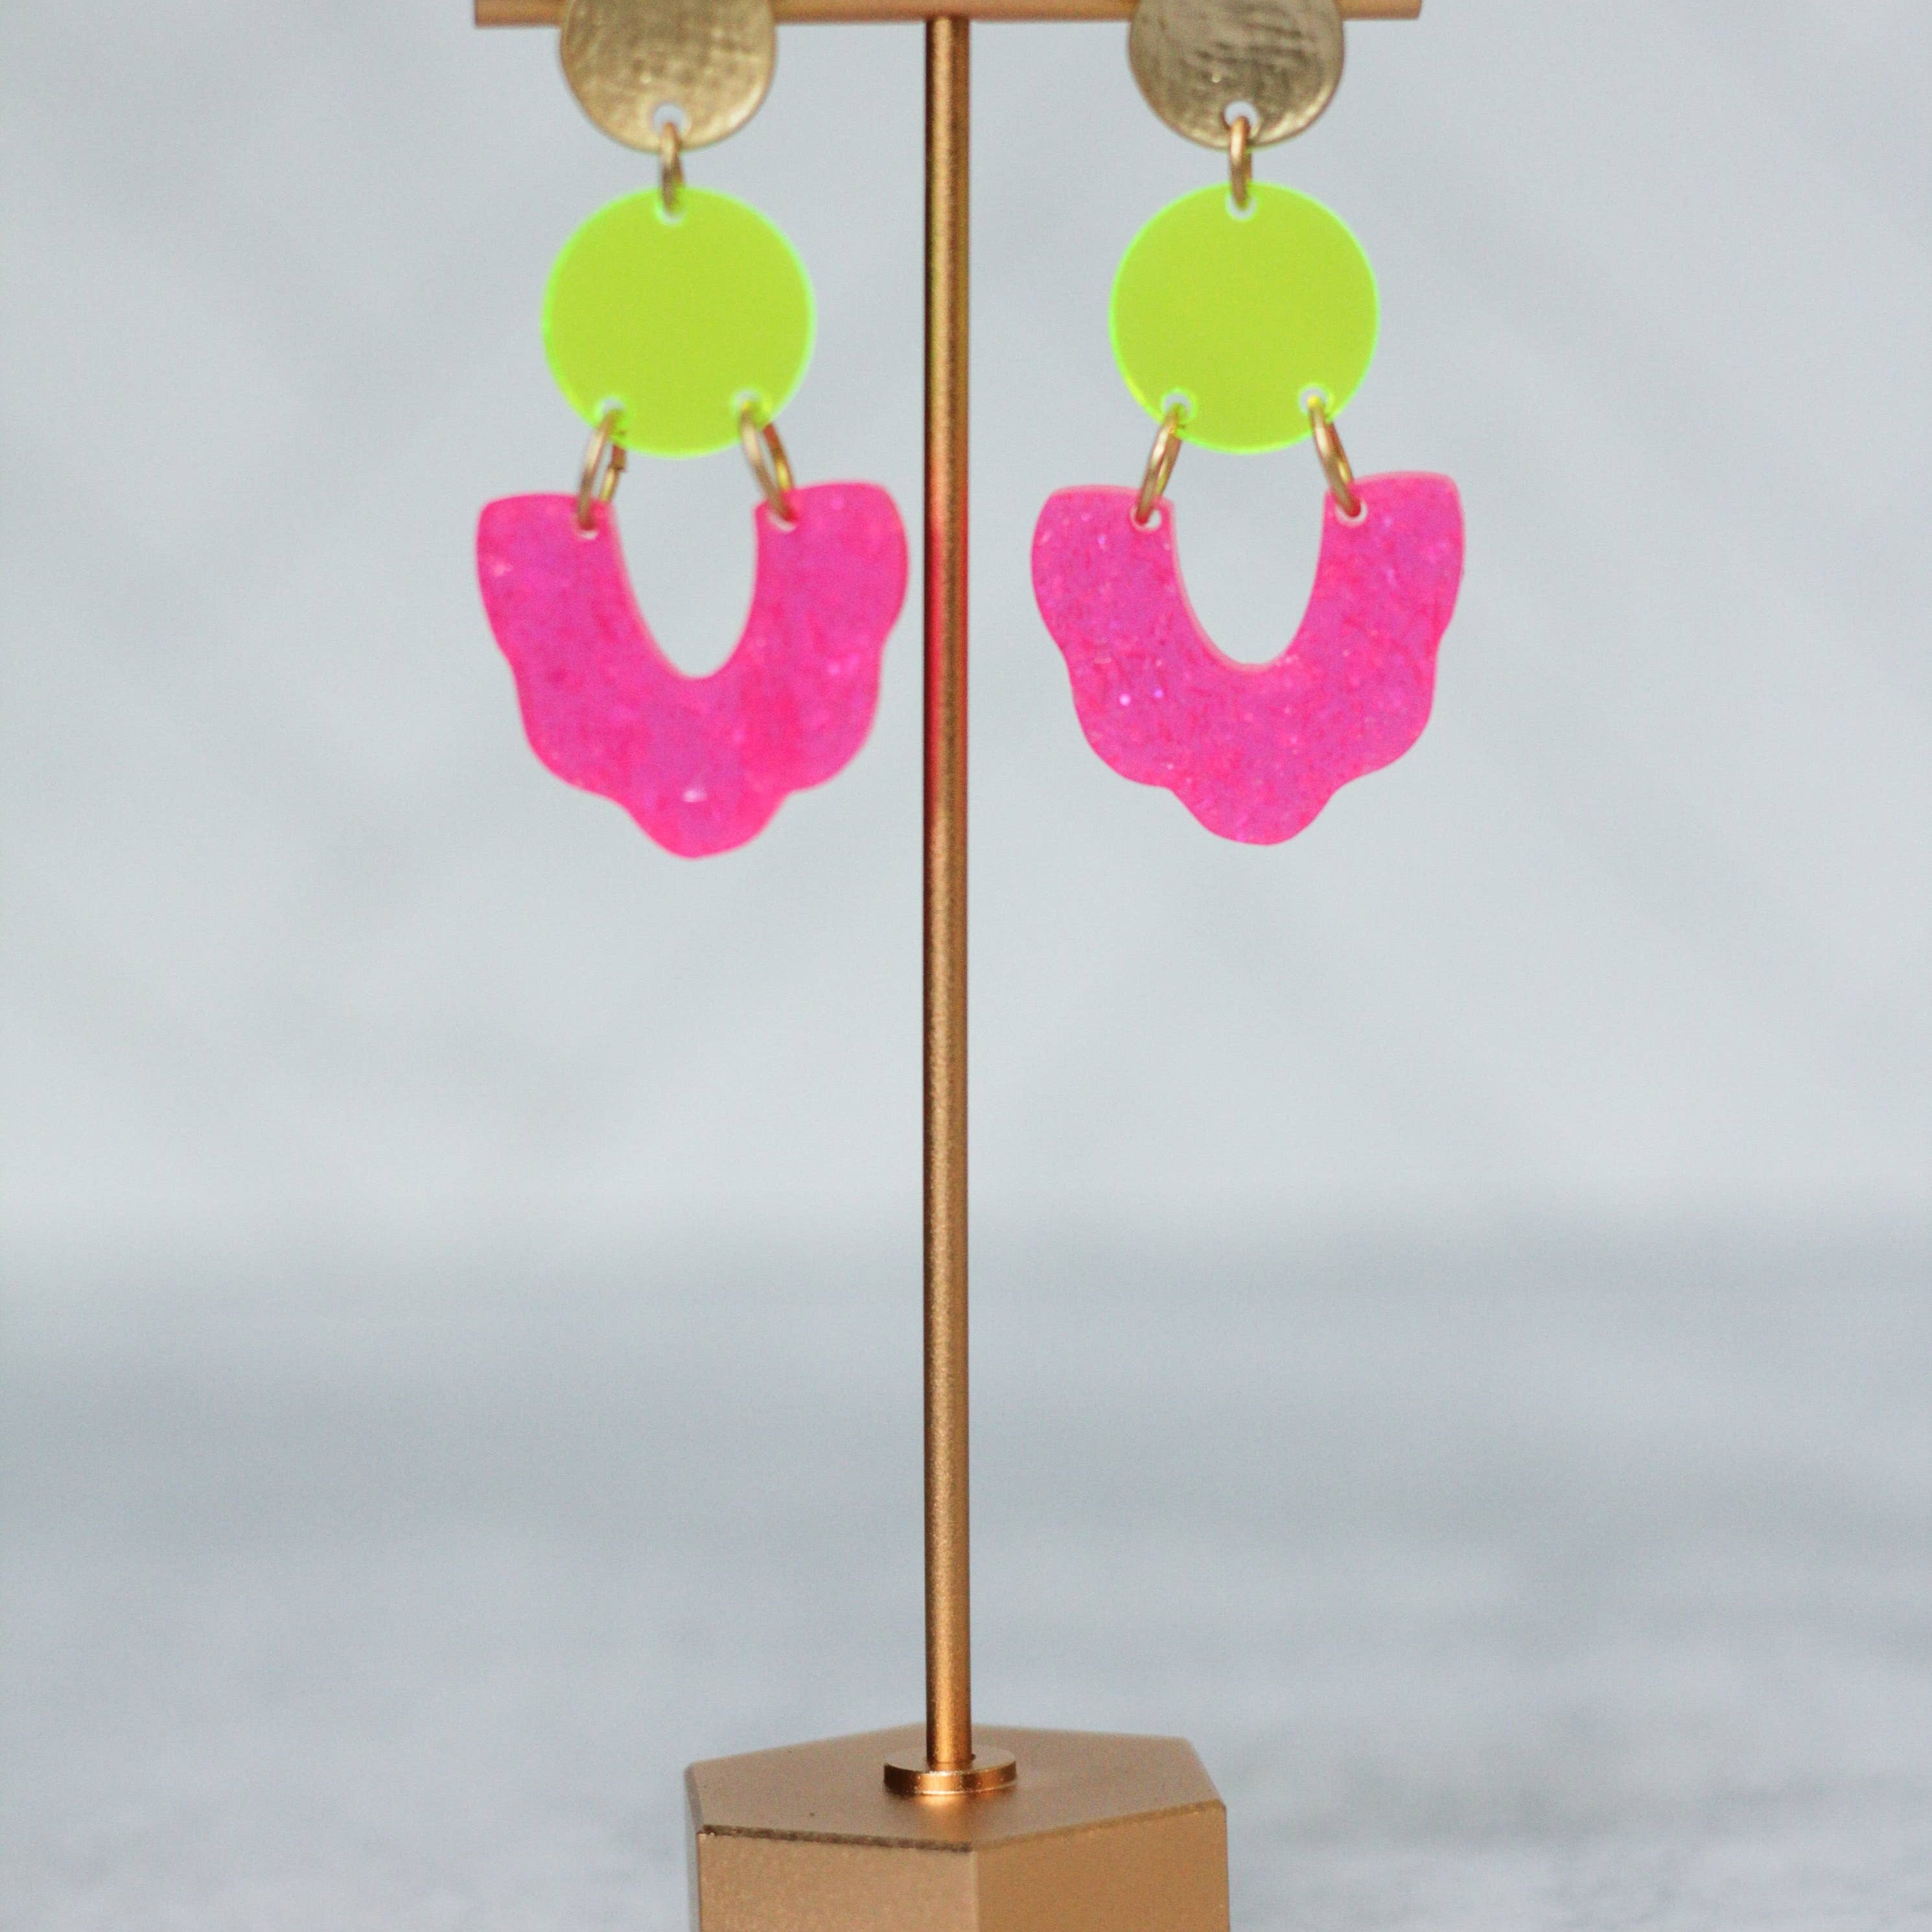 Isabella Neon Earrings-Earrings-WMG-LouisGeorge Boutique, Women’s Fashion Boutique Located in Trussville, Alabama